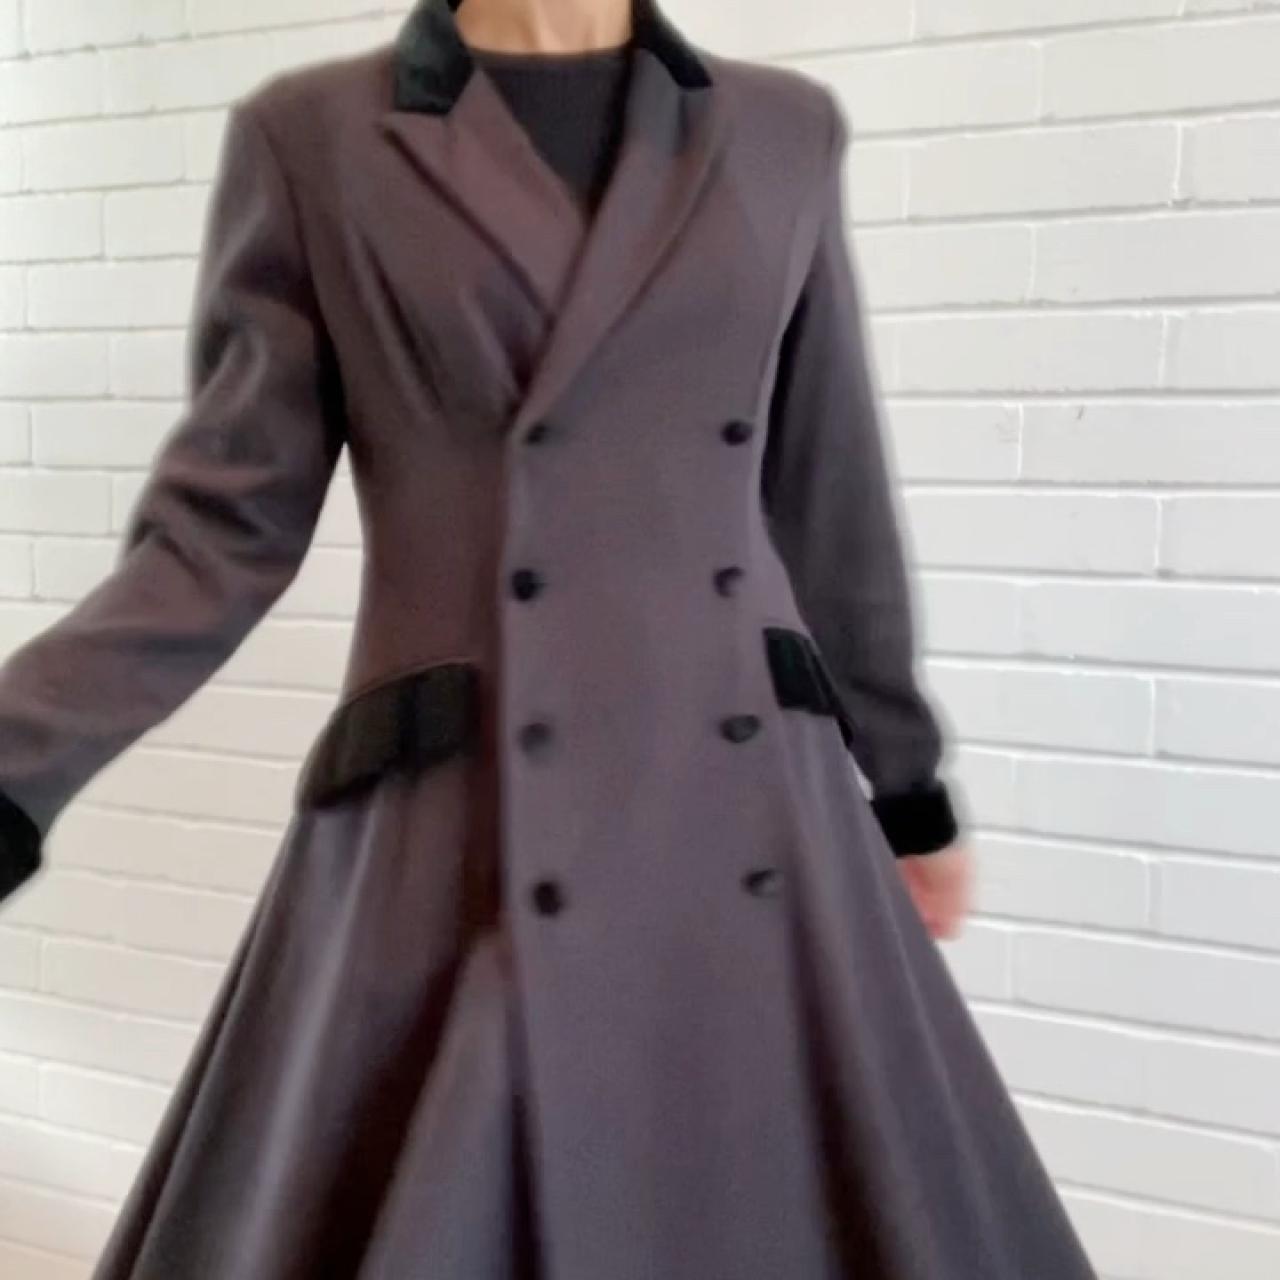 Vintage Laura Ashley Riding Coat Fit And Flare Depop